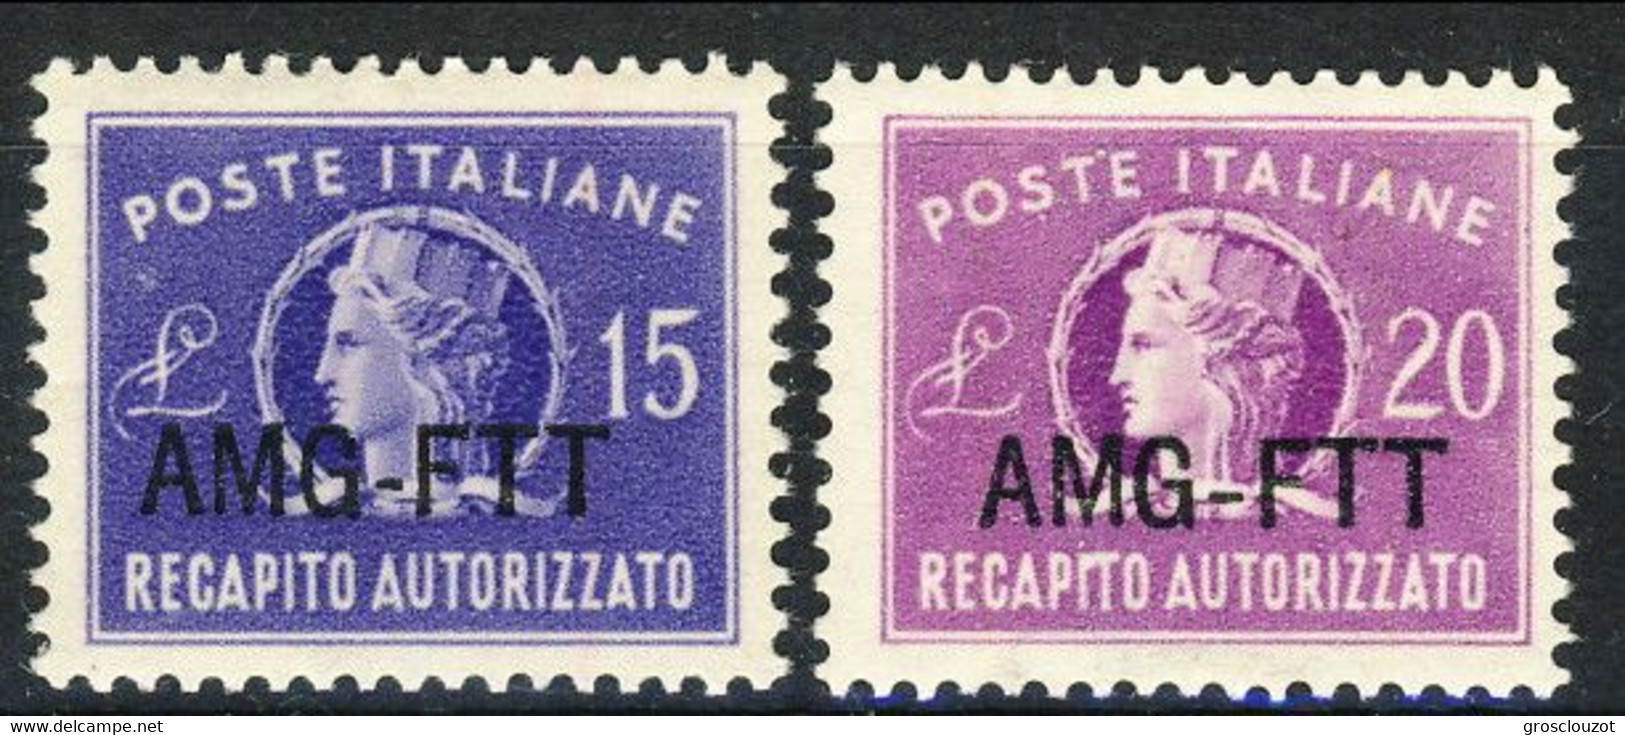 Trieste 1949-52 Recapito Autorizzato Sass. N. 4 - 5 MNH Cat. € 18 - Postal And Consigned Parcels